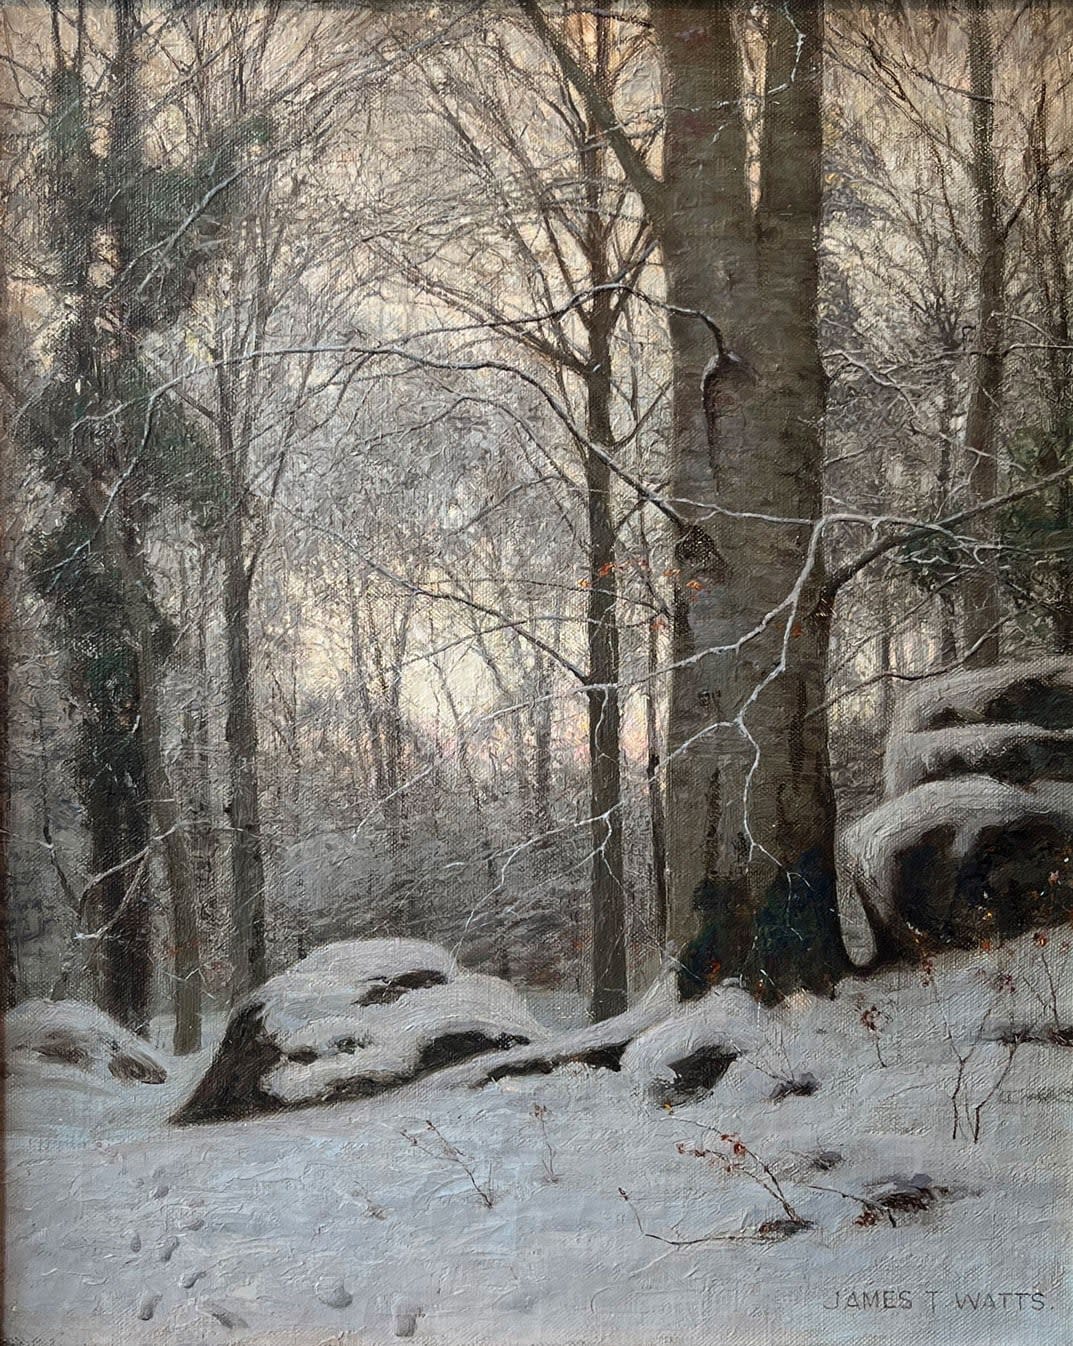 Snow in a Welch Wood